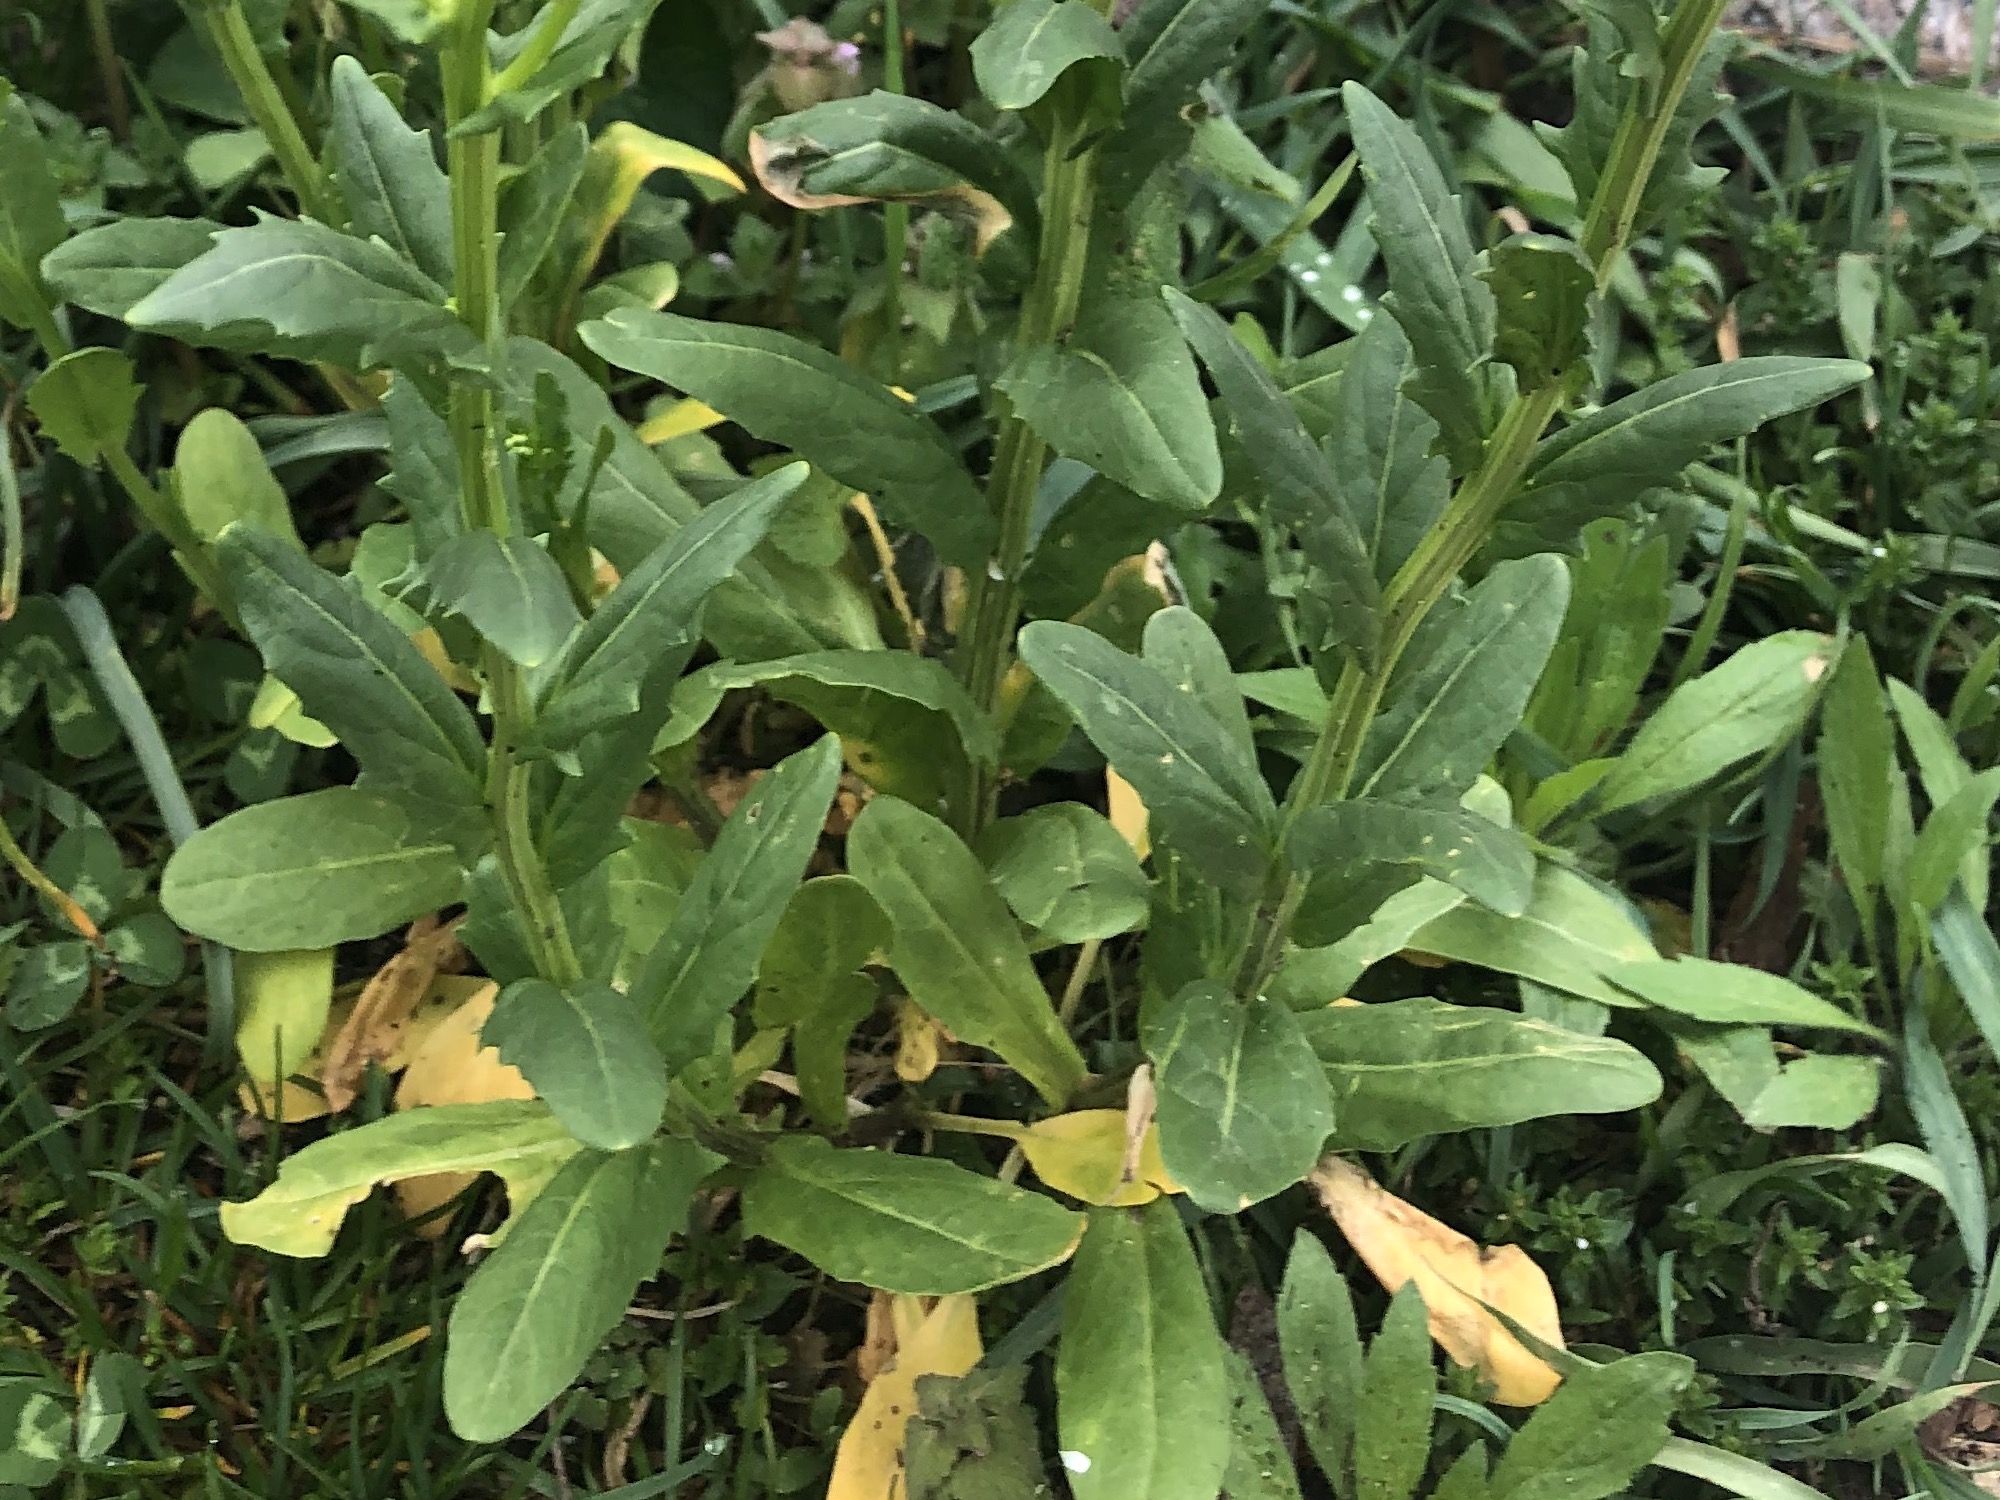 Field Pennycress leaves near retaining pond on corner of Manitou Way and Nakoma Road in Madison, Wisconsin on May 4, 2021.